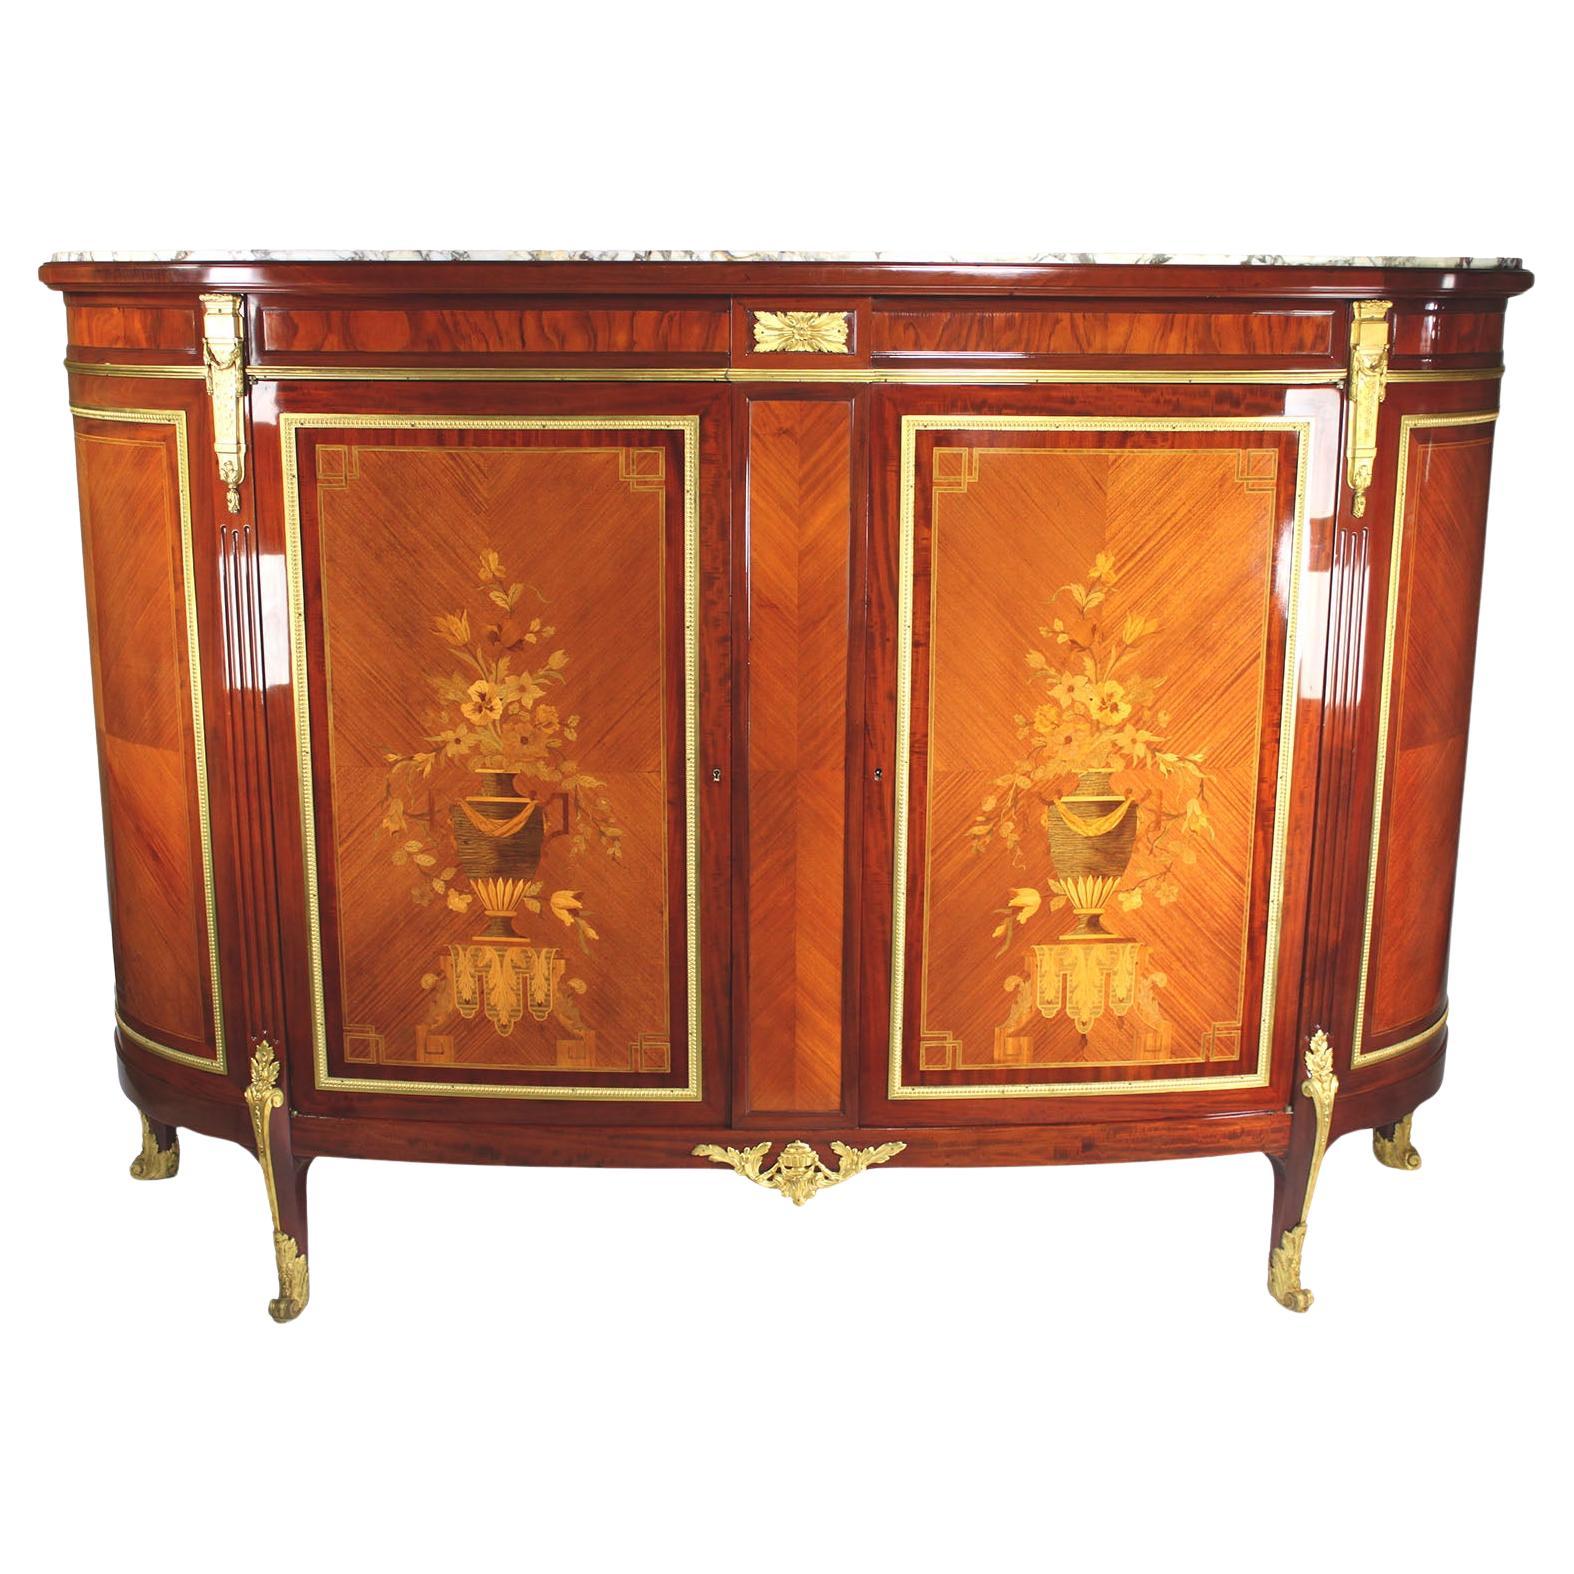 French 19th-20th C. Louis XV Style Mahogany Ormolu Mounted Buffet Server Cabinet